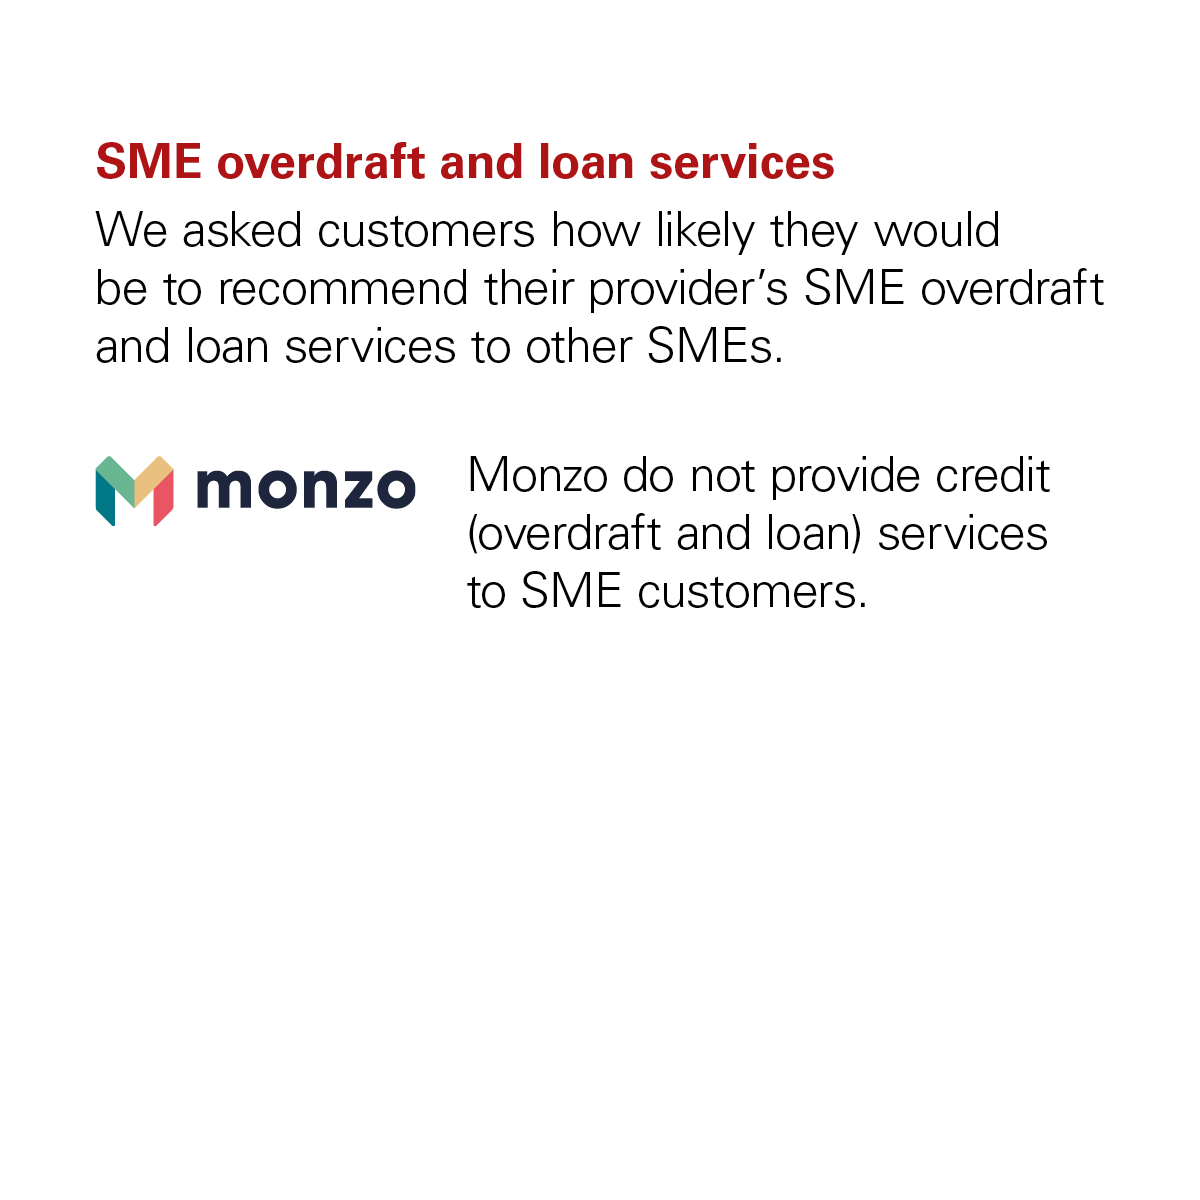 Image showing that Monzo didn't receive a score from the CMA for the SME Overdraft and Loan Services category because Monzo doesn't provide credit services to SME customers.